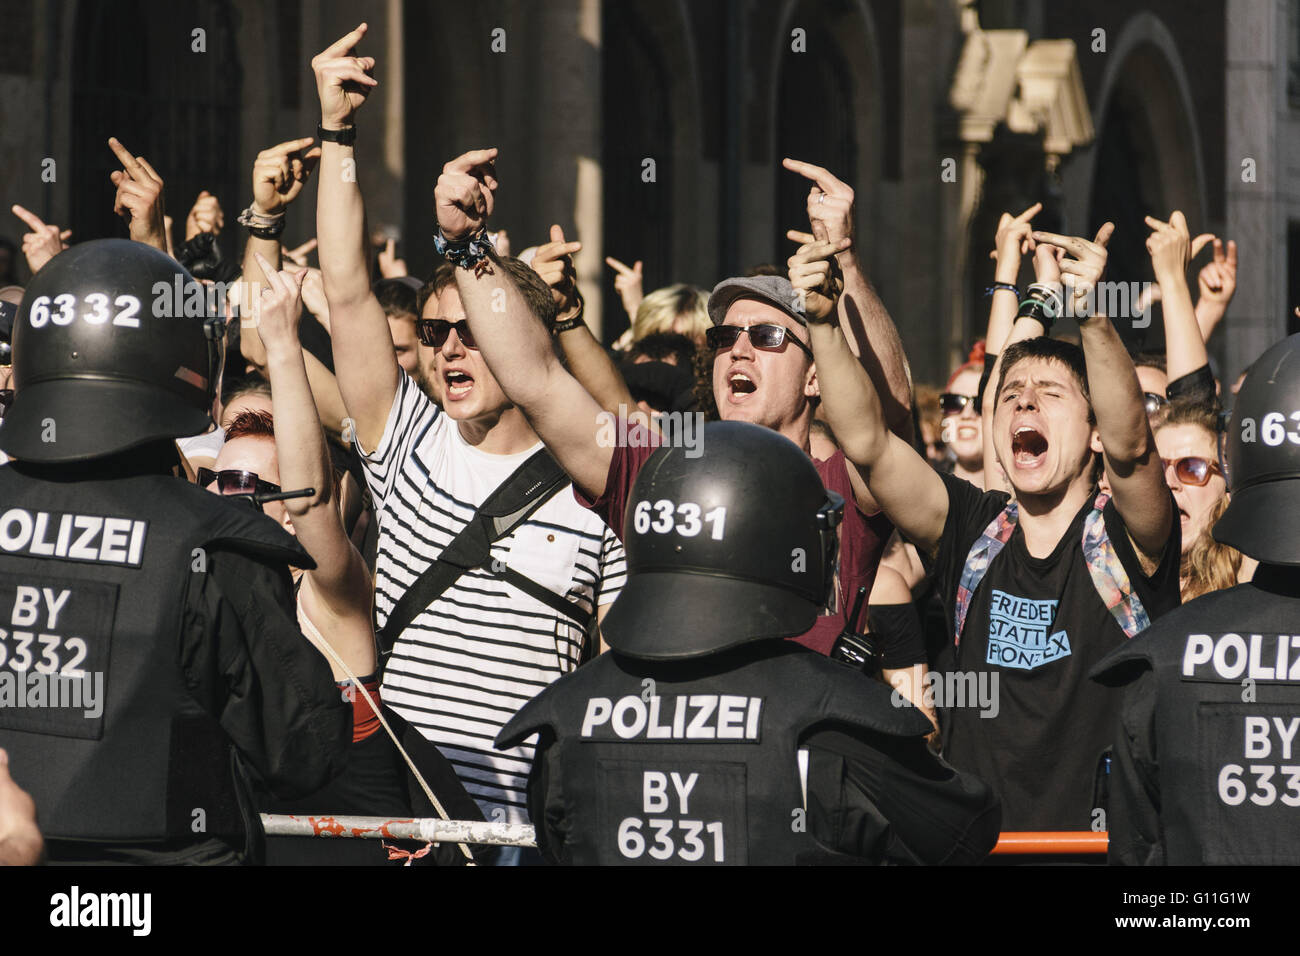 Berlin, Berlin, Germany. 7th May, 2016. Activists during the counter protests against the rally held under the motto 'Merkel muss weg![Merkel must go]' organised by far-right group 'We for Berlin & We for Germany' Credit:  Jan Scheunert/ZUMA Wire/Alamy Live News Stock Photo